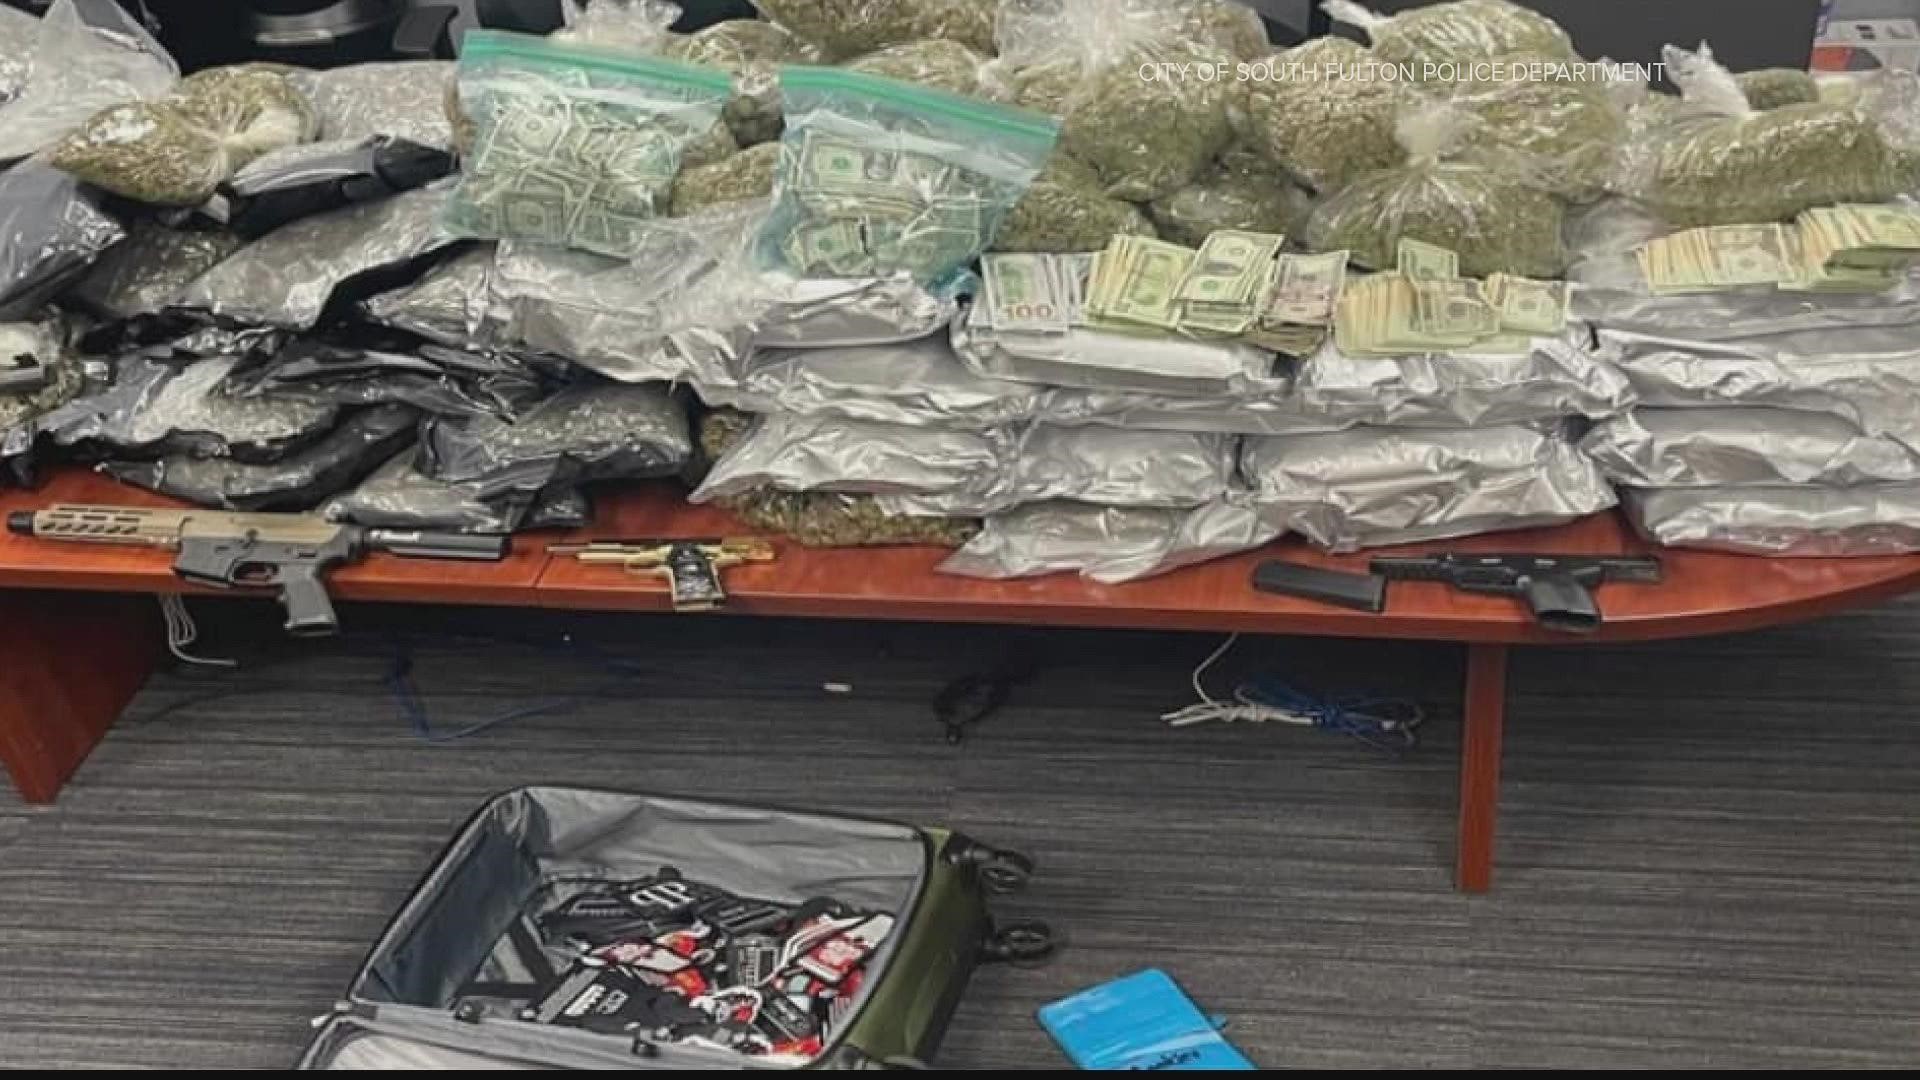 Police in South Fulton ended up finding much more than a laptop, including drugs, debit cards and weapons.